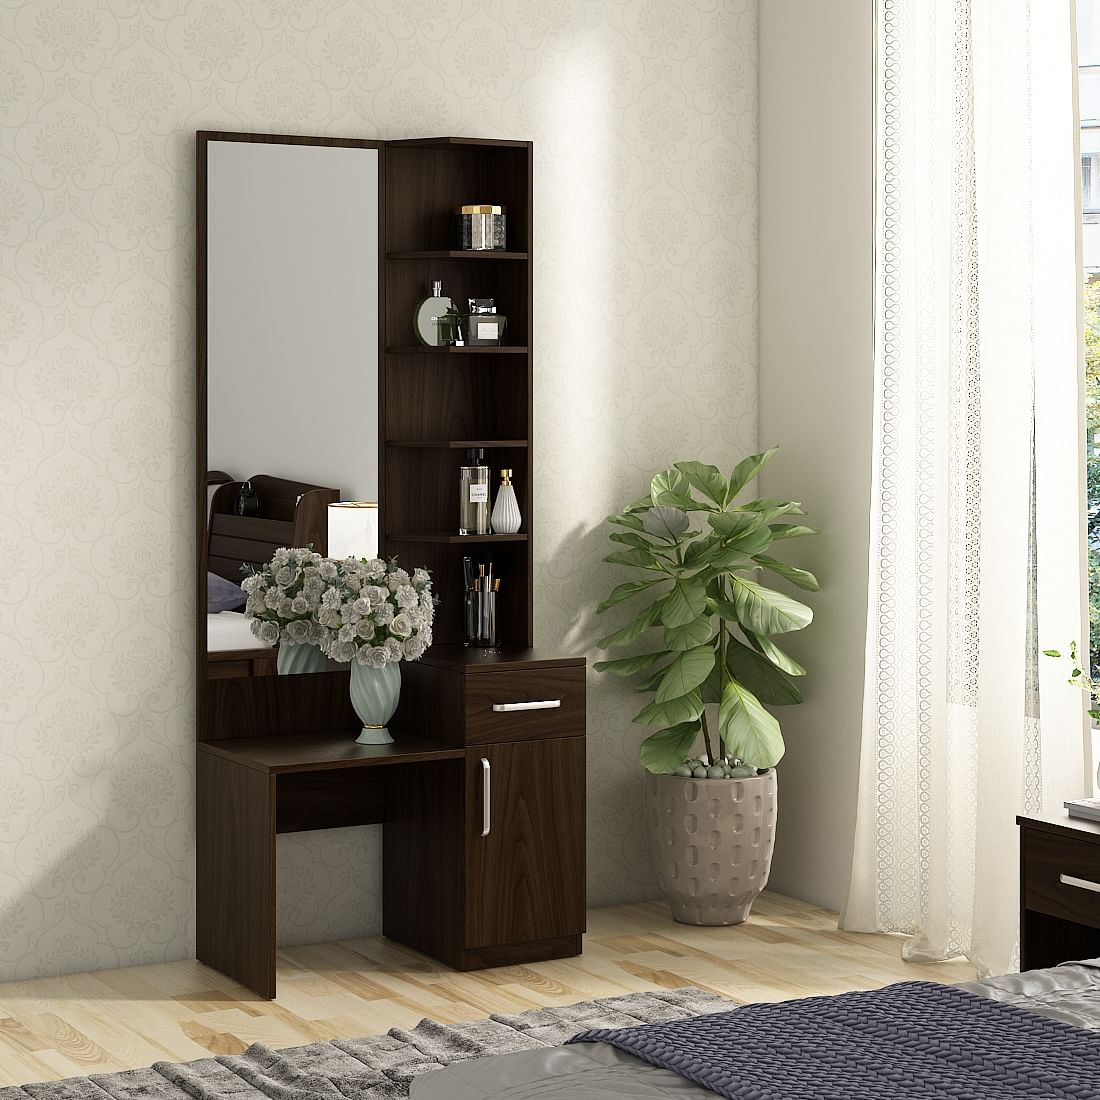 Large Dressing table for Sale in Lucknow, Uttar Pradesh Classified |  IndiaListed.com